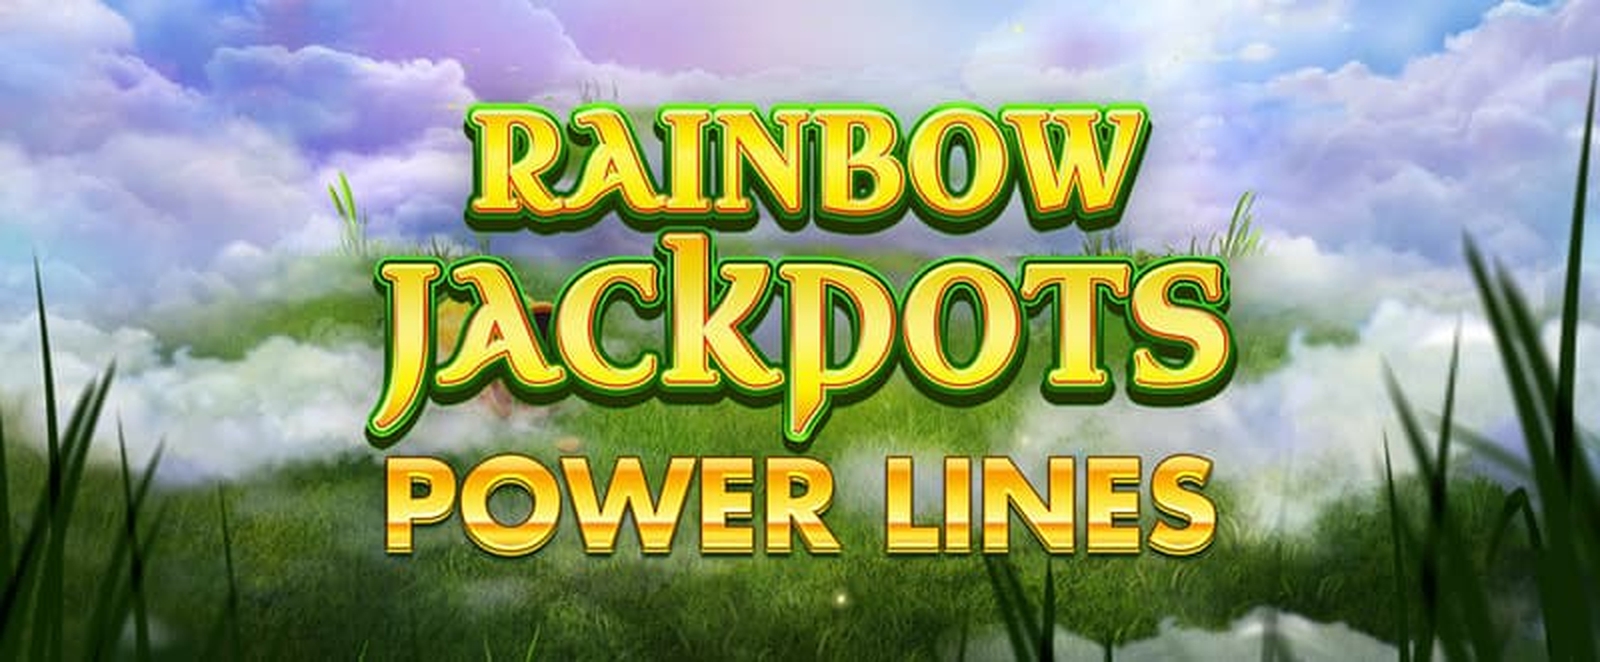 The Rainbow Jackpots Power Lines Online Slot Demo Game by Red Tiger Gaming